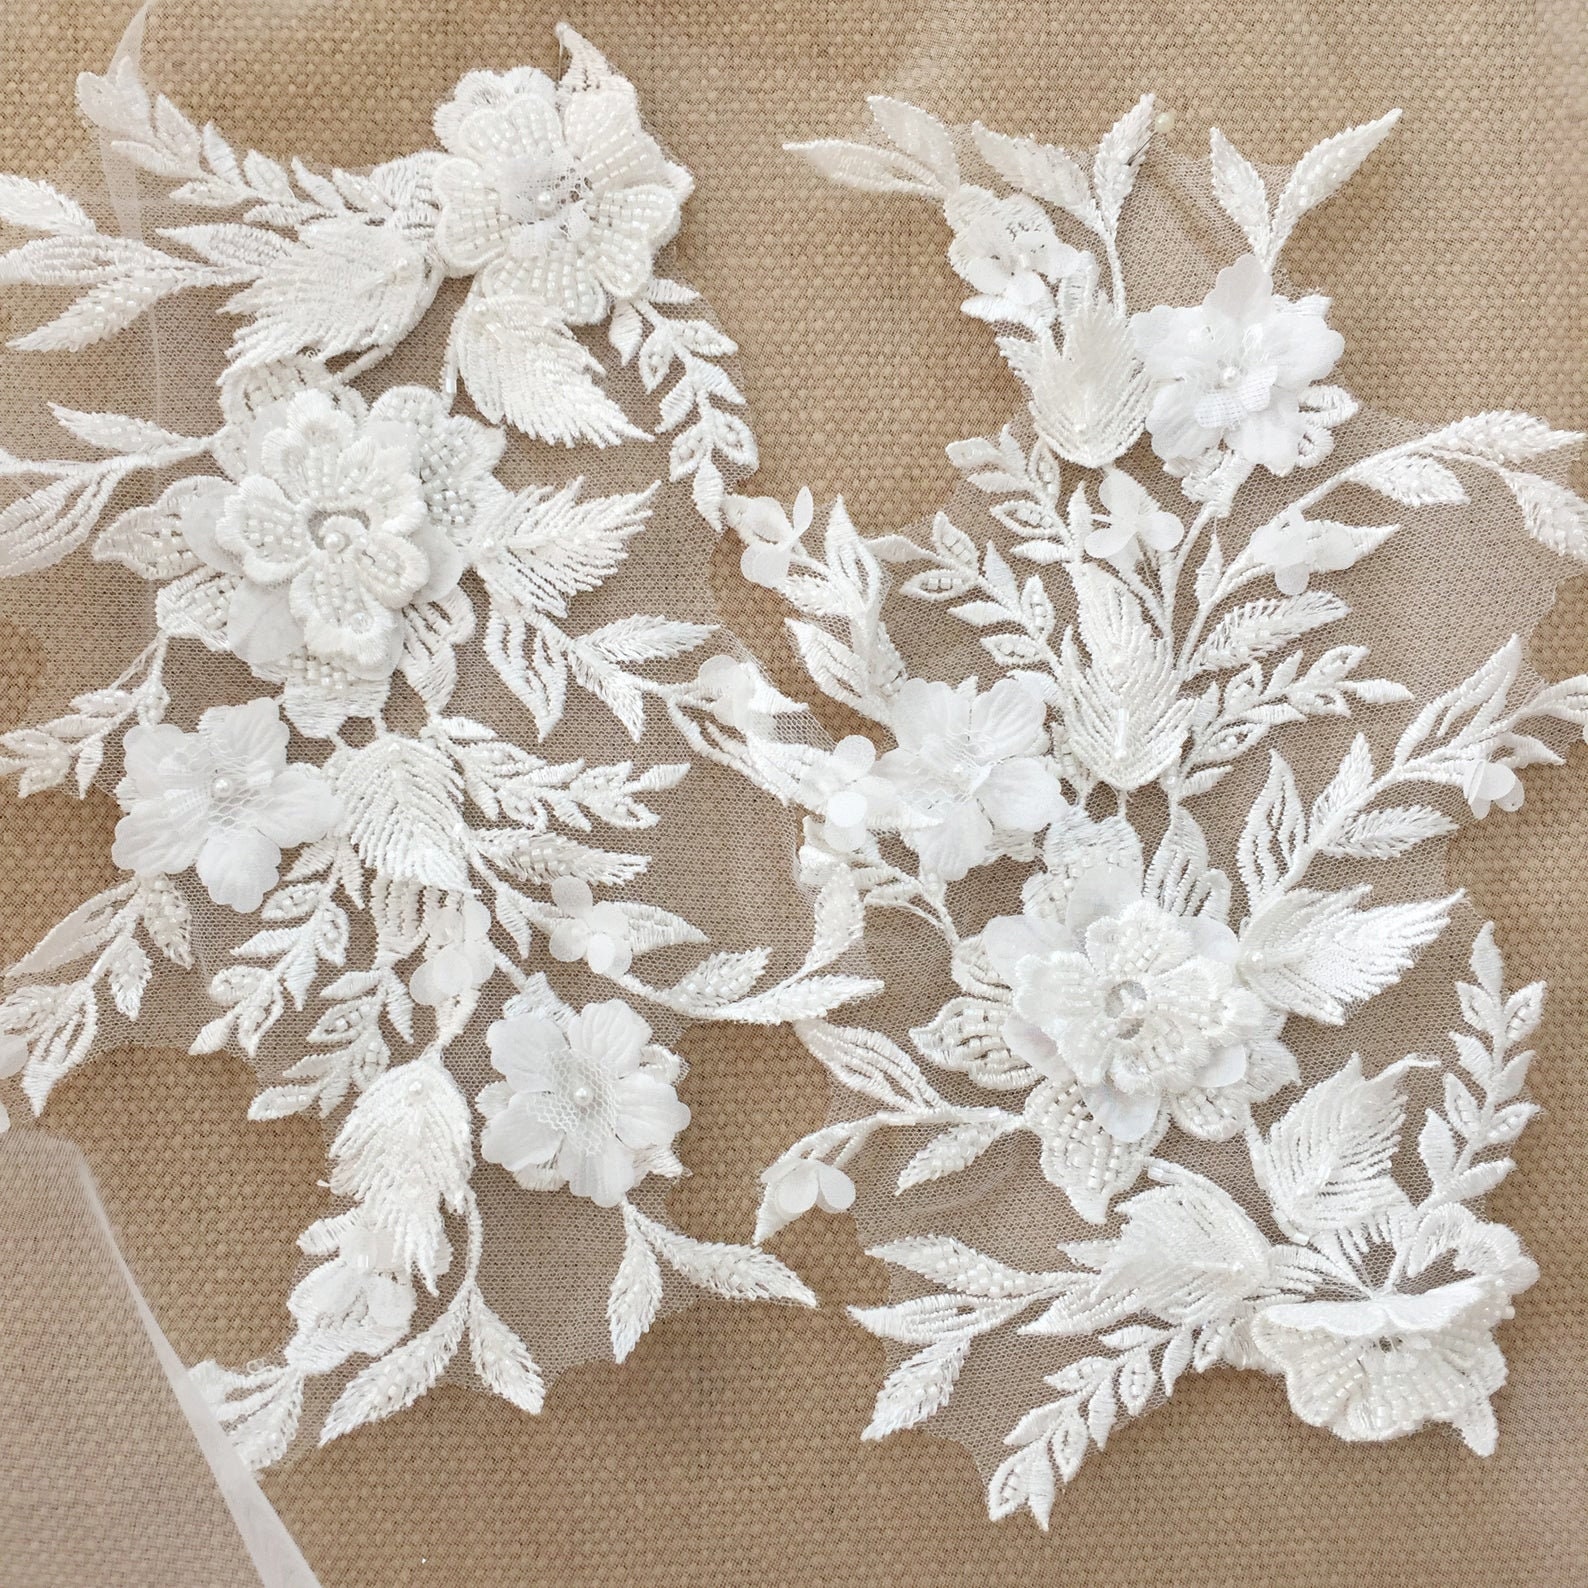 Luxurious Embroidered Ivory Bridal Lace Applique with Dimensional Flowers -  Mariell Bridal Jewelry & Wedding Accessories